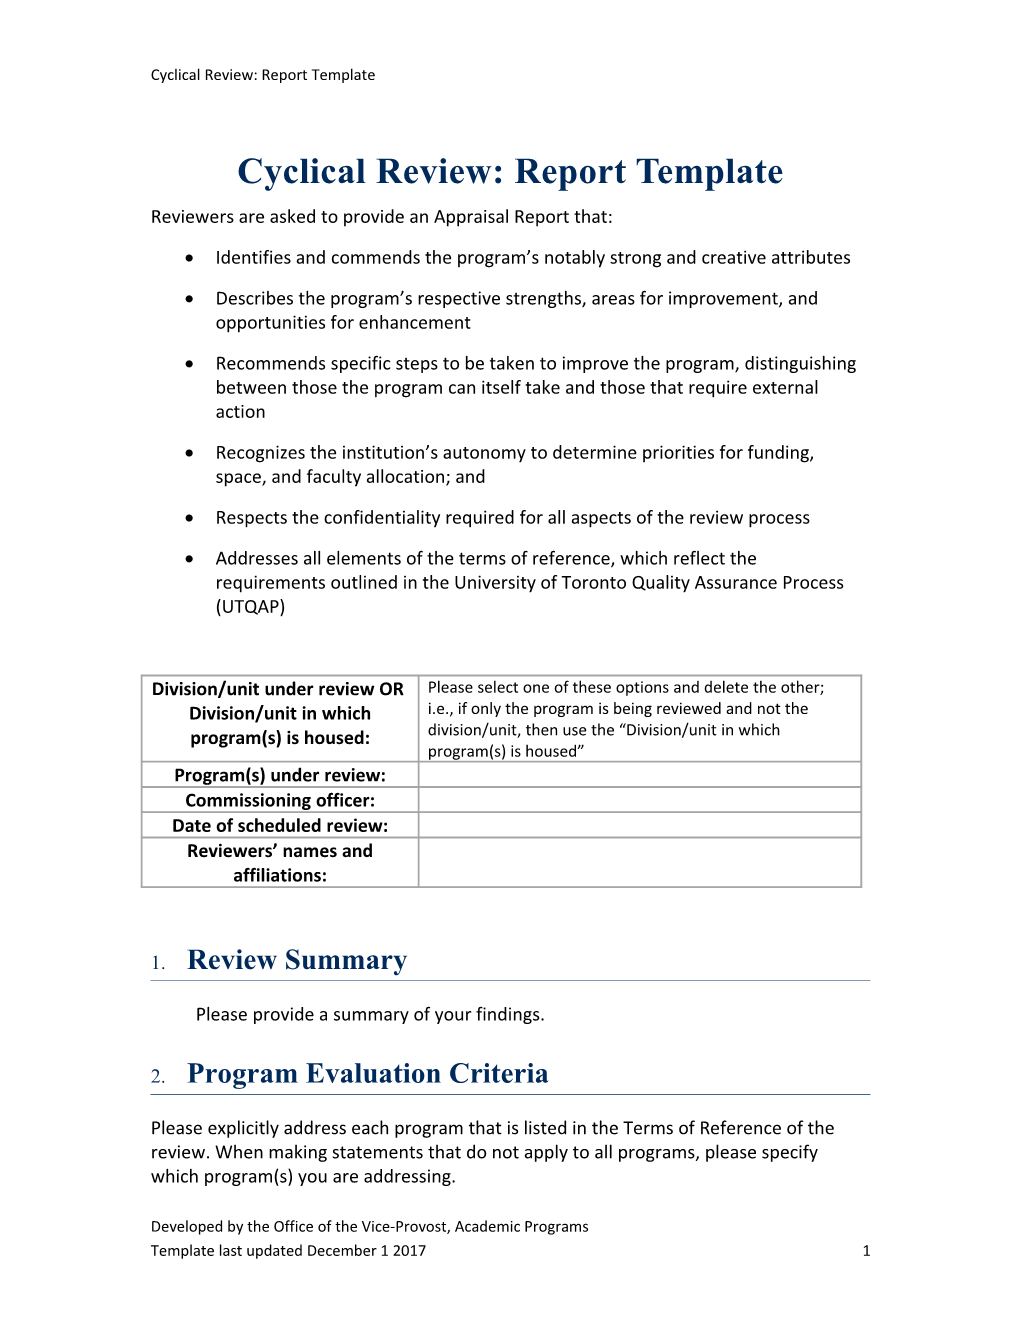 Cyclical Review: Report Template